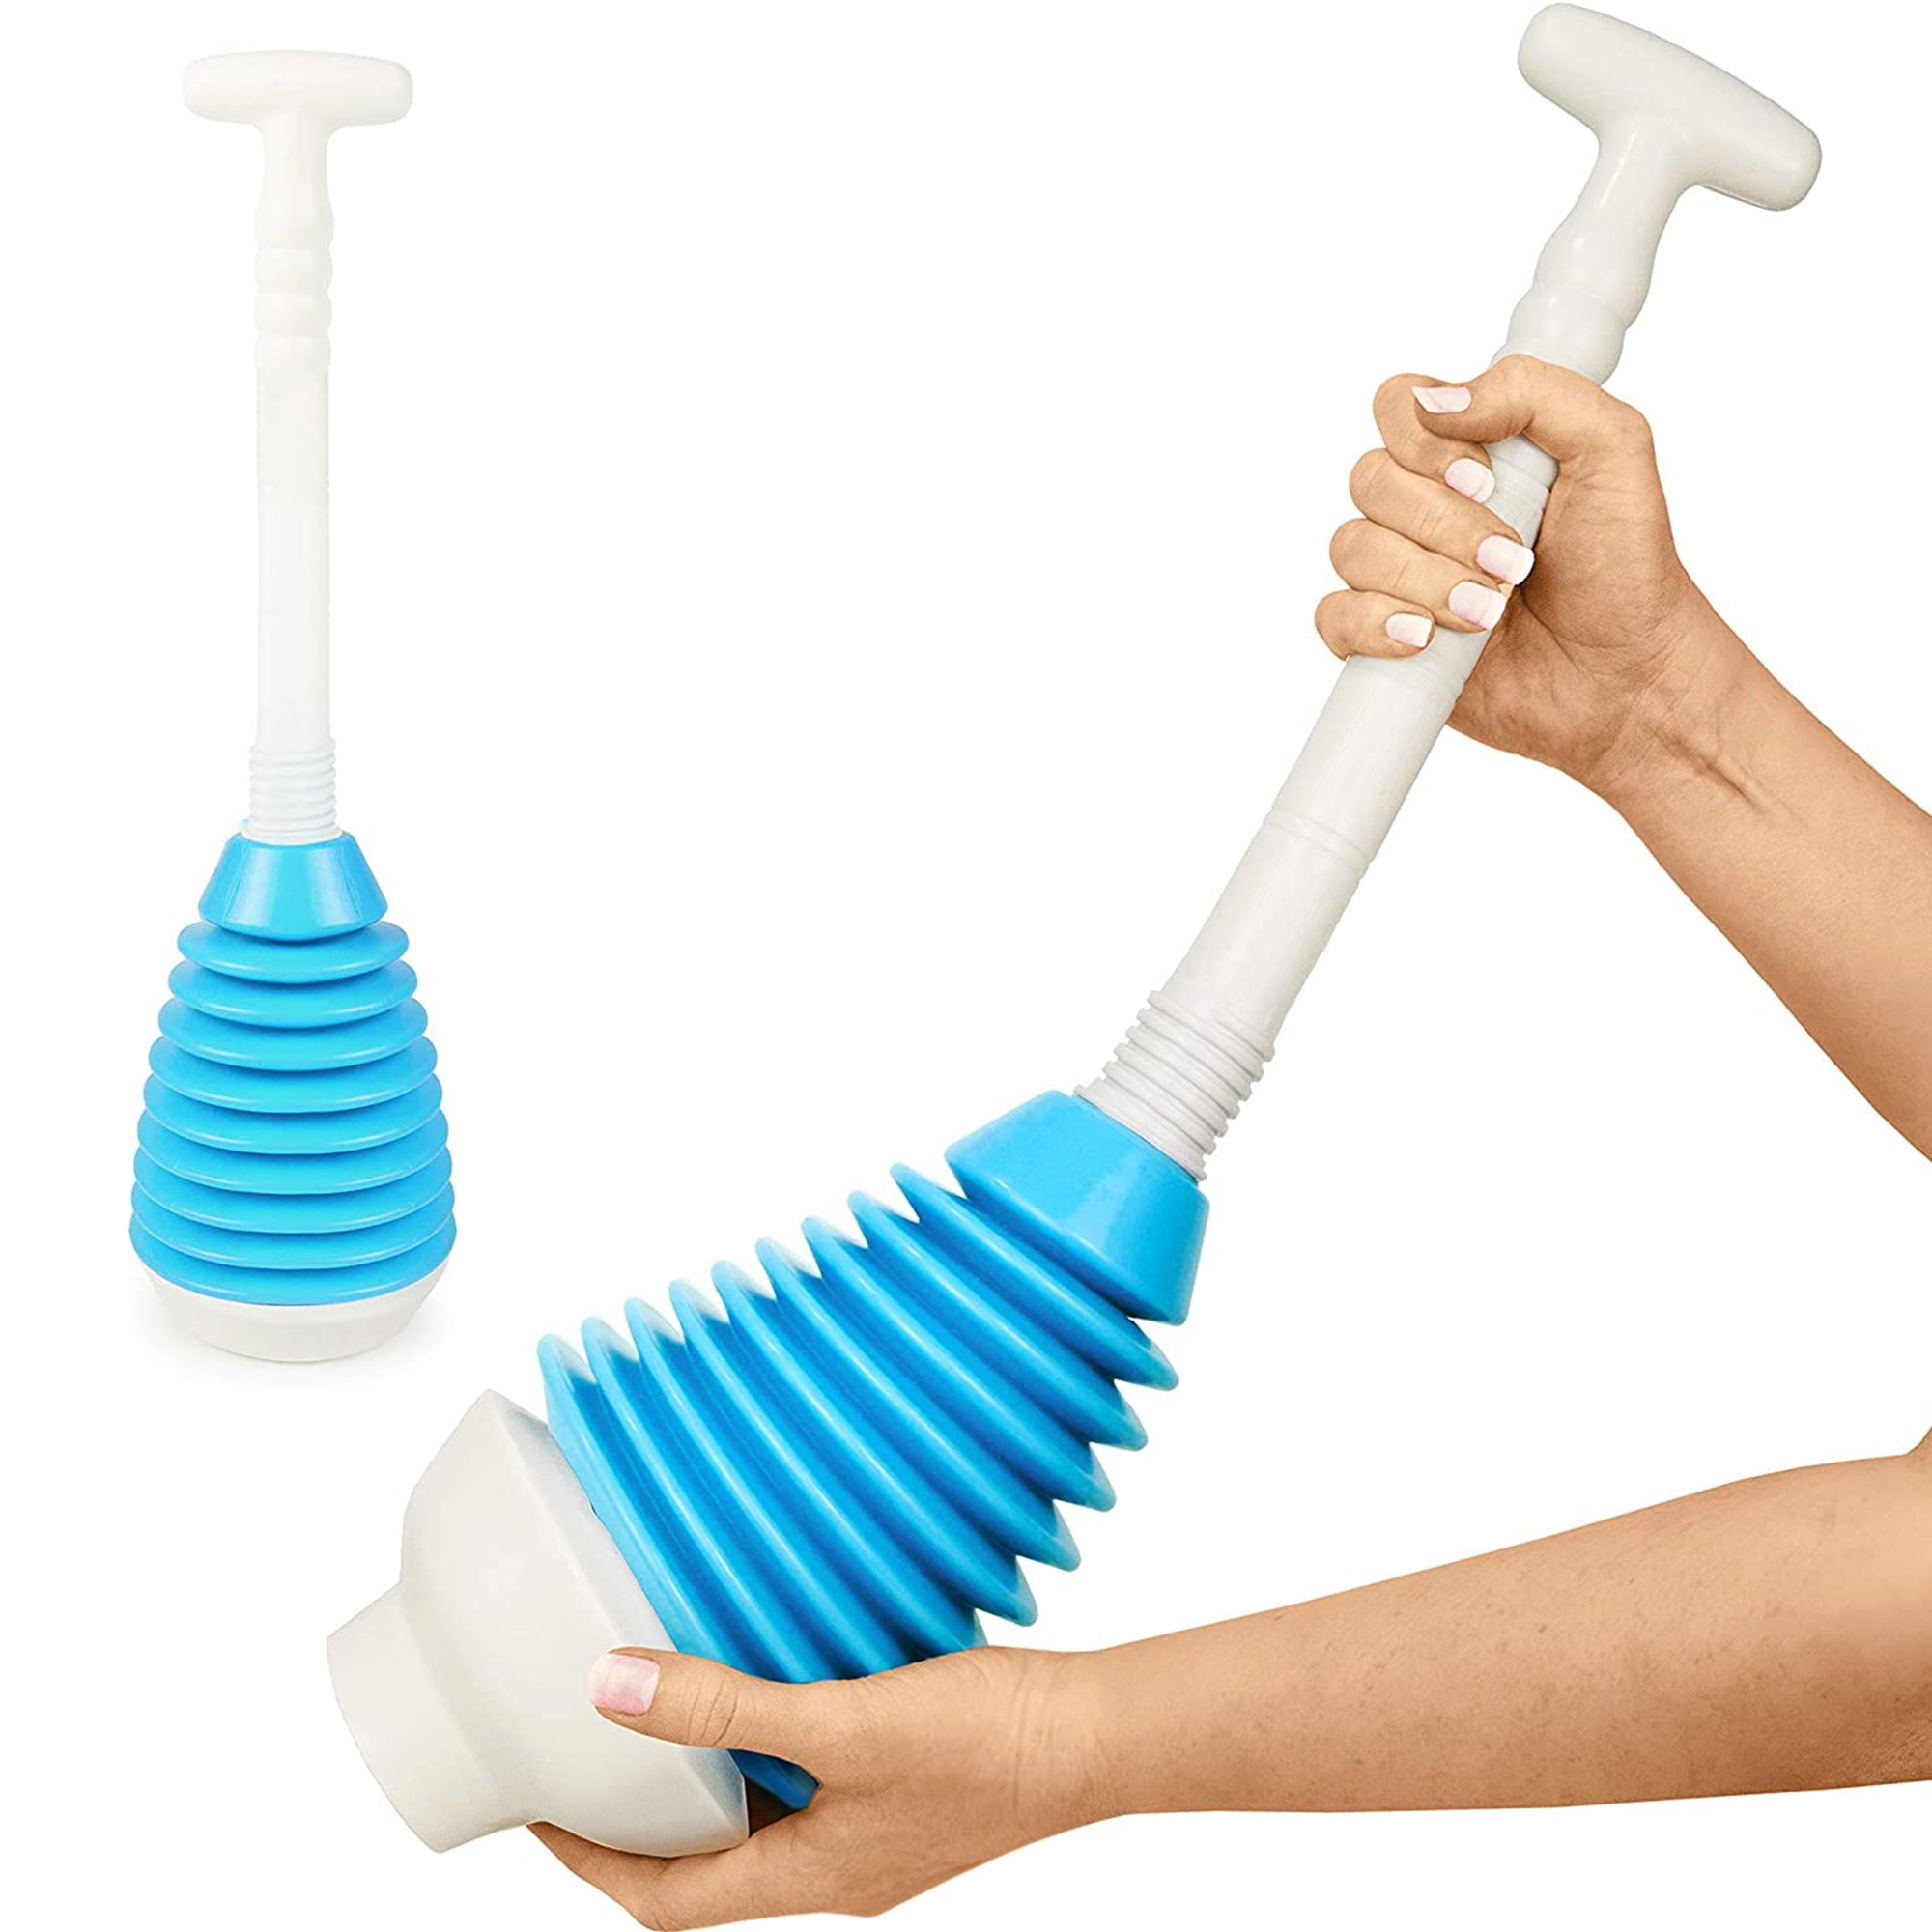 Universal Bathroom and shower Cleaning Tool